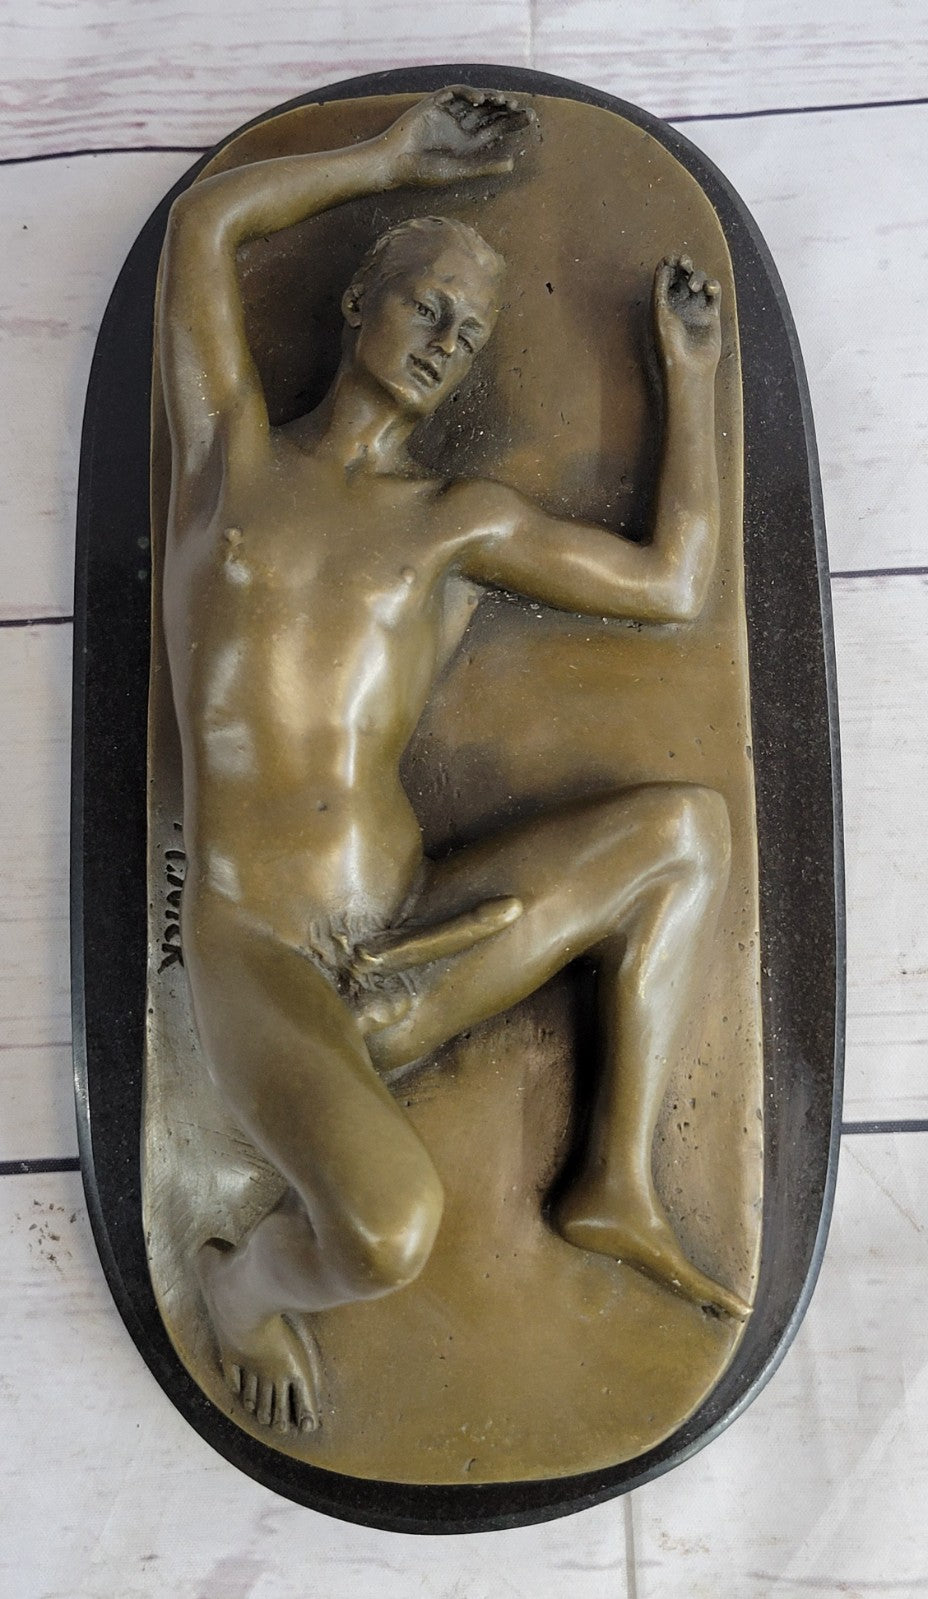 COLLECTIBLE BRONZE SCULPTURE STATUE Gay Art Collector Edition Nude Male Man Gay